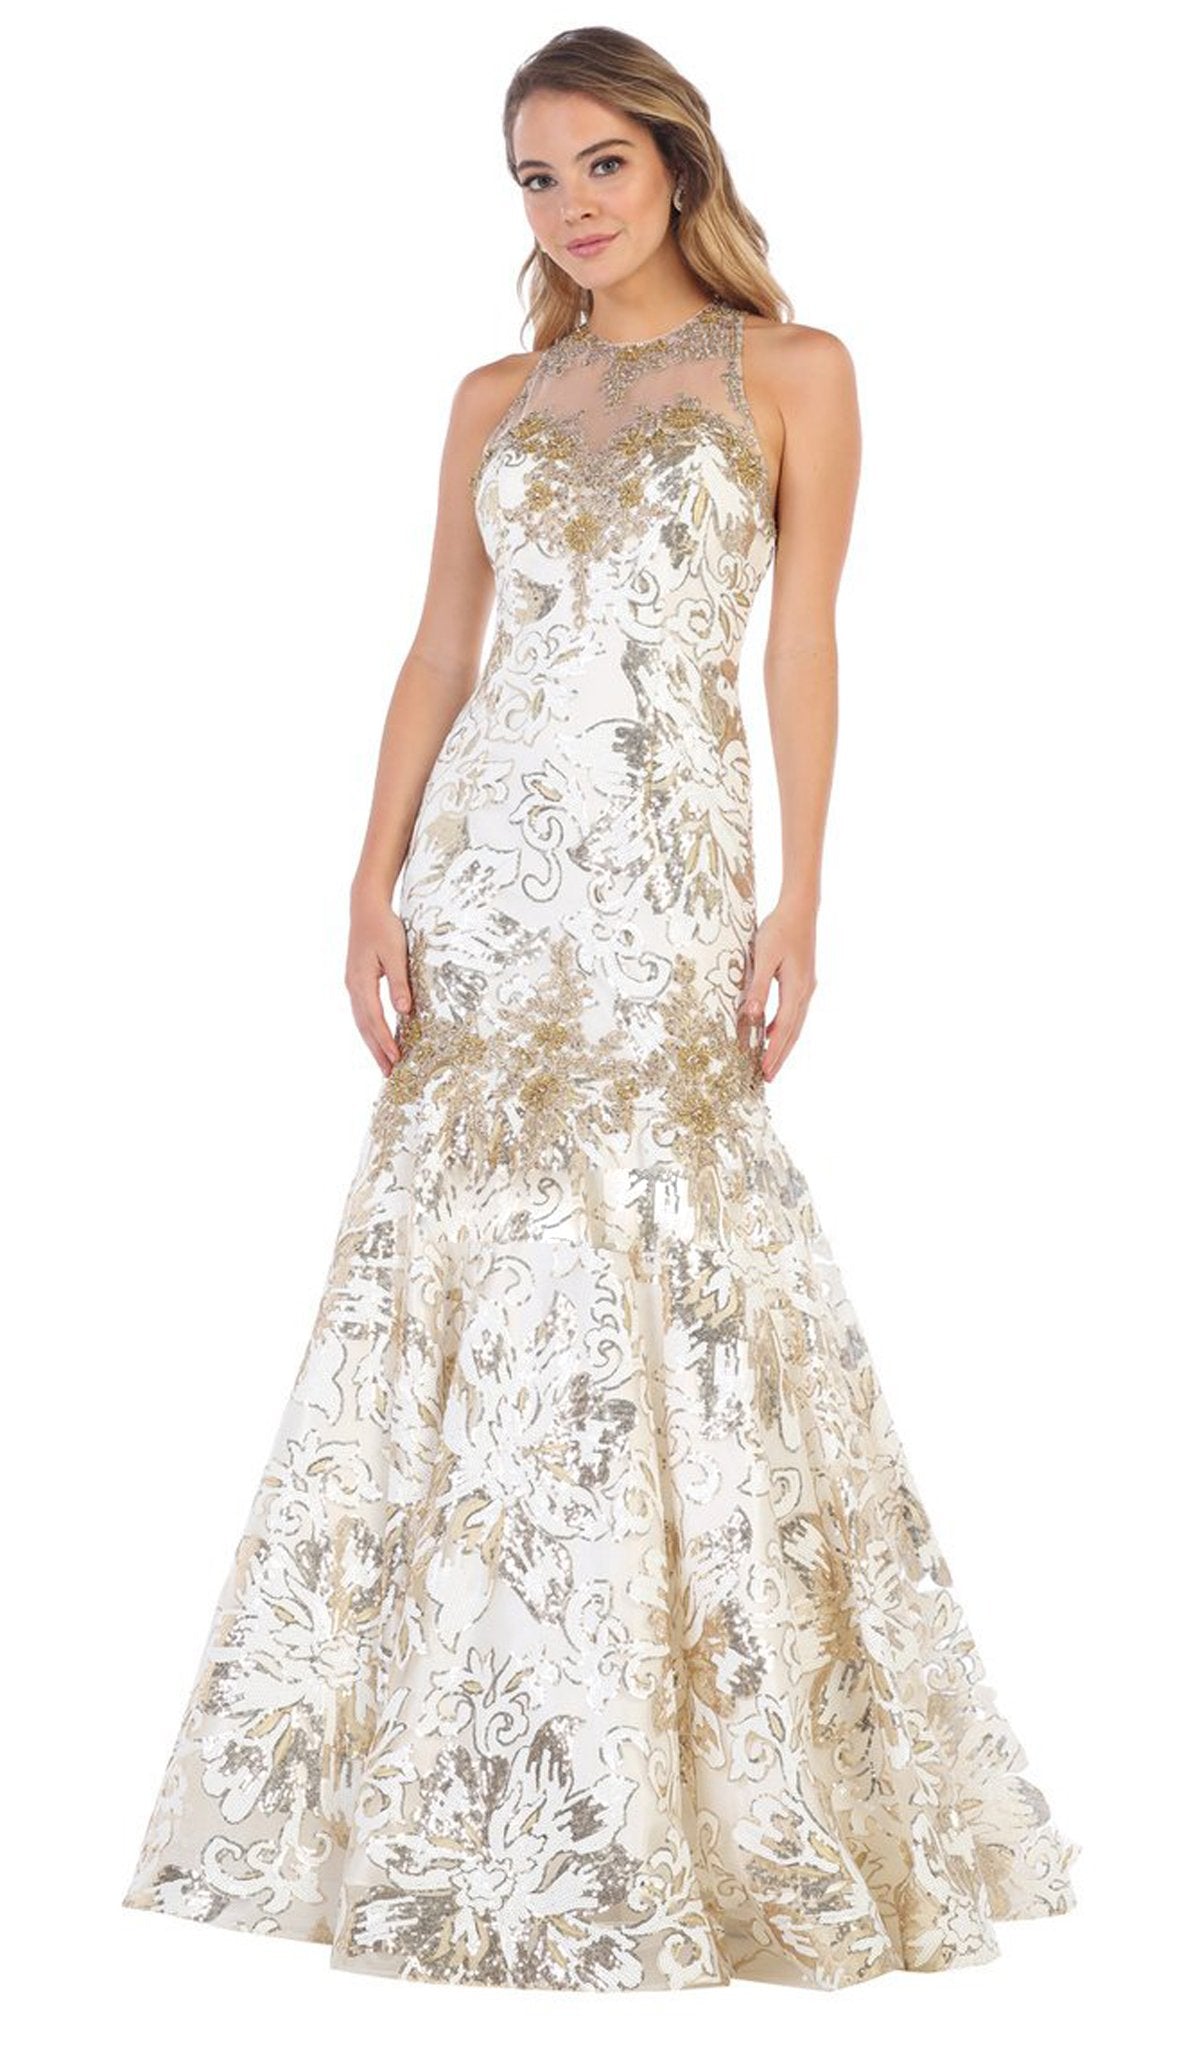 May Queen - RQ7698 Sequin Embroidered Halter Gown In White and Gold